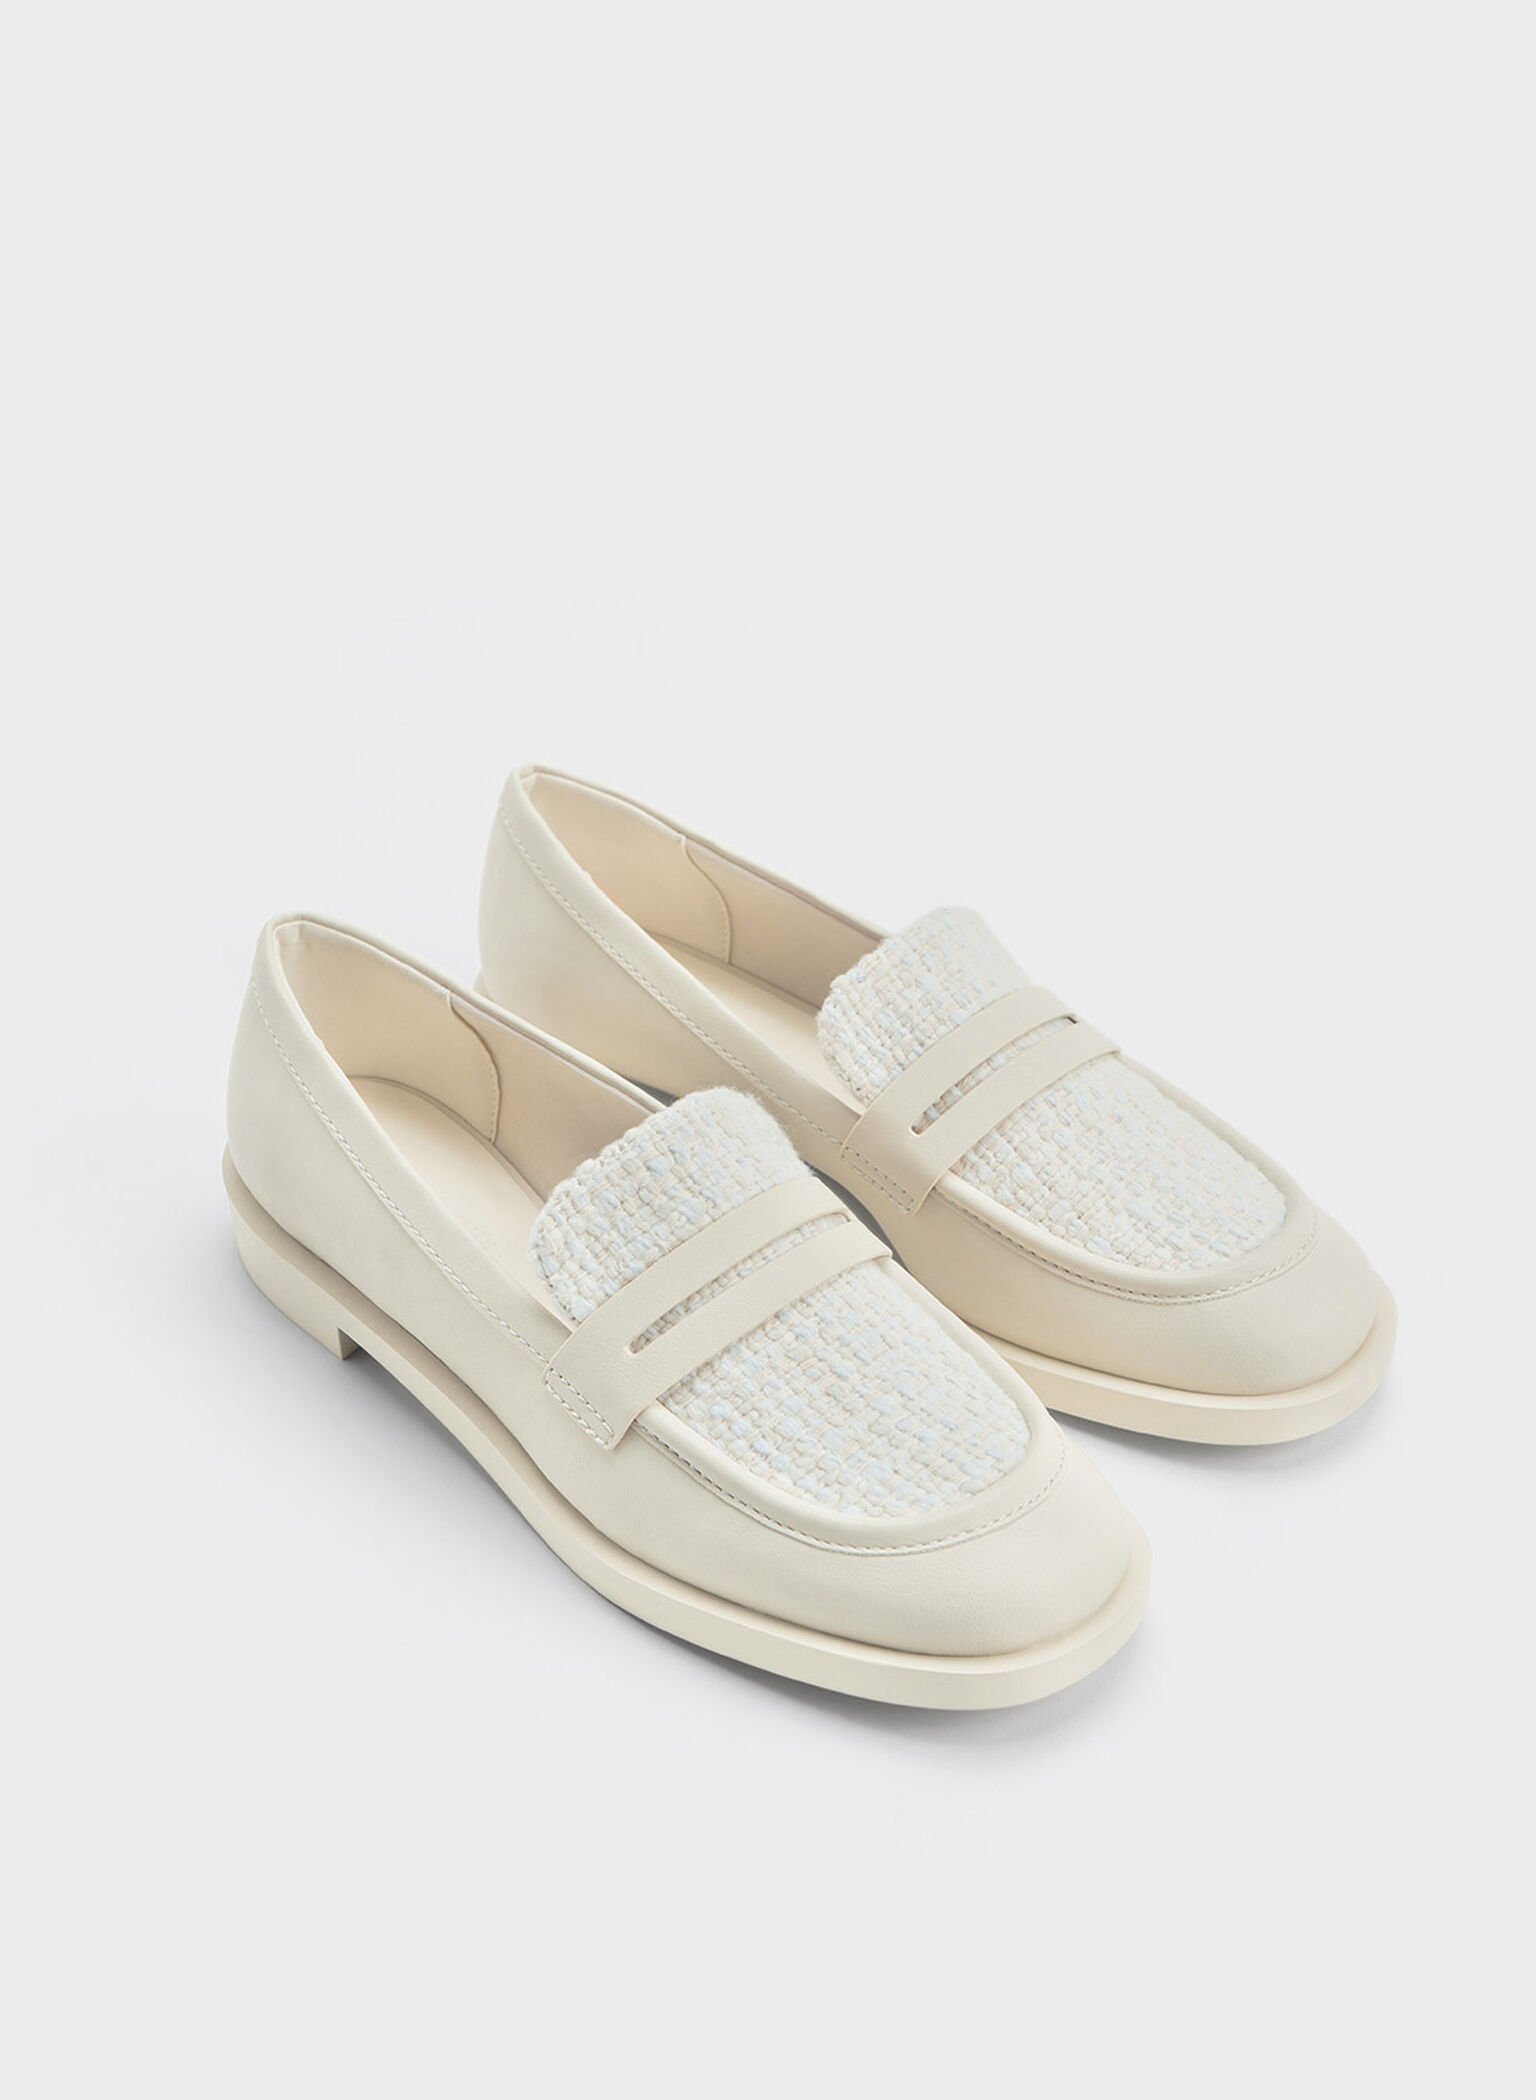 Chalk Gretel Tweed Penny Loafers - CHARLES & KEITH MY